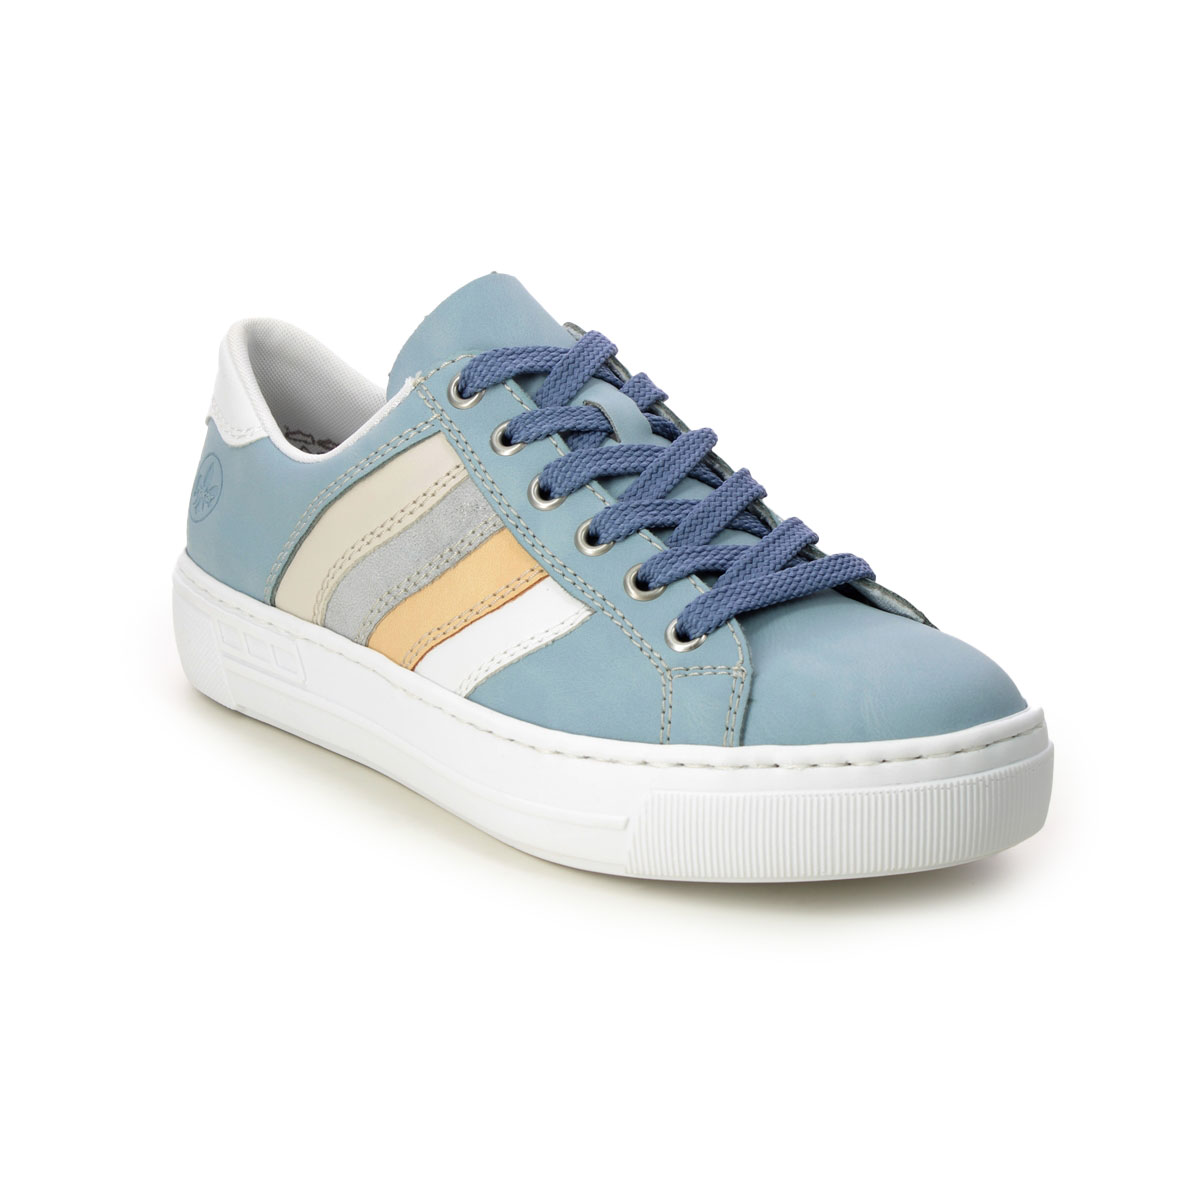 Rieker L8802-10 Blue Womens trainers in a Plain Man-made in Size 39